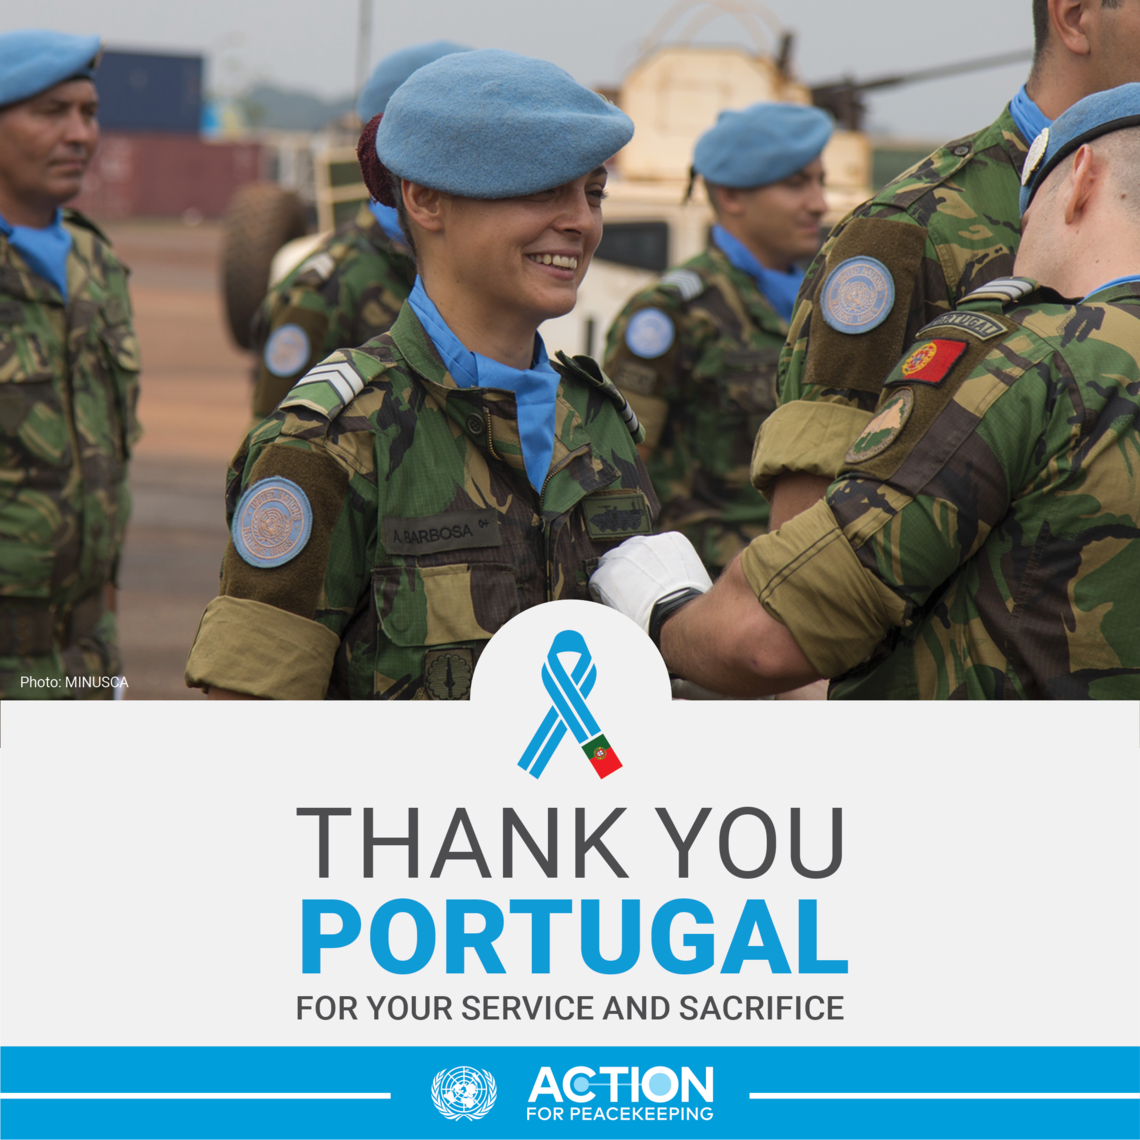 Thank you Portugal for your service and sacrifice